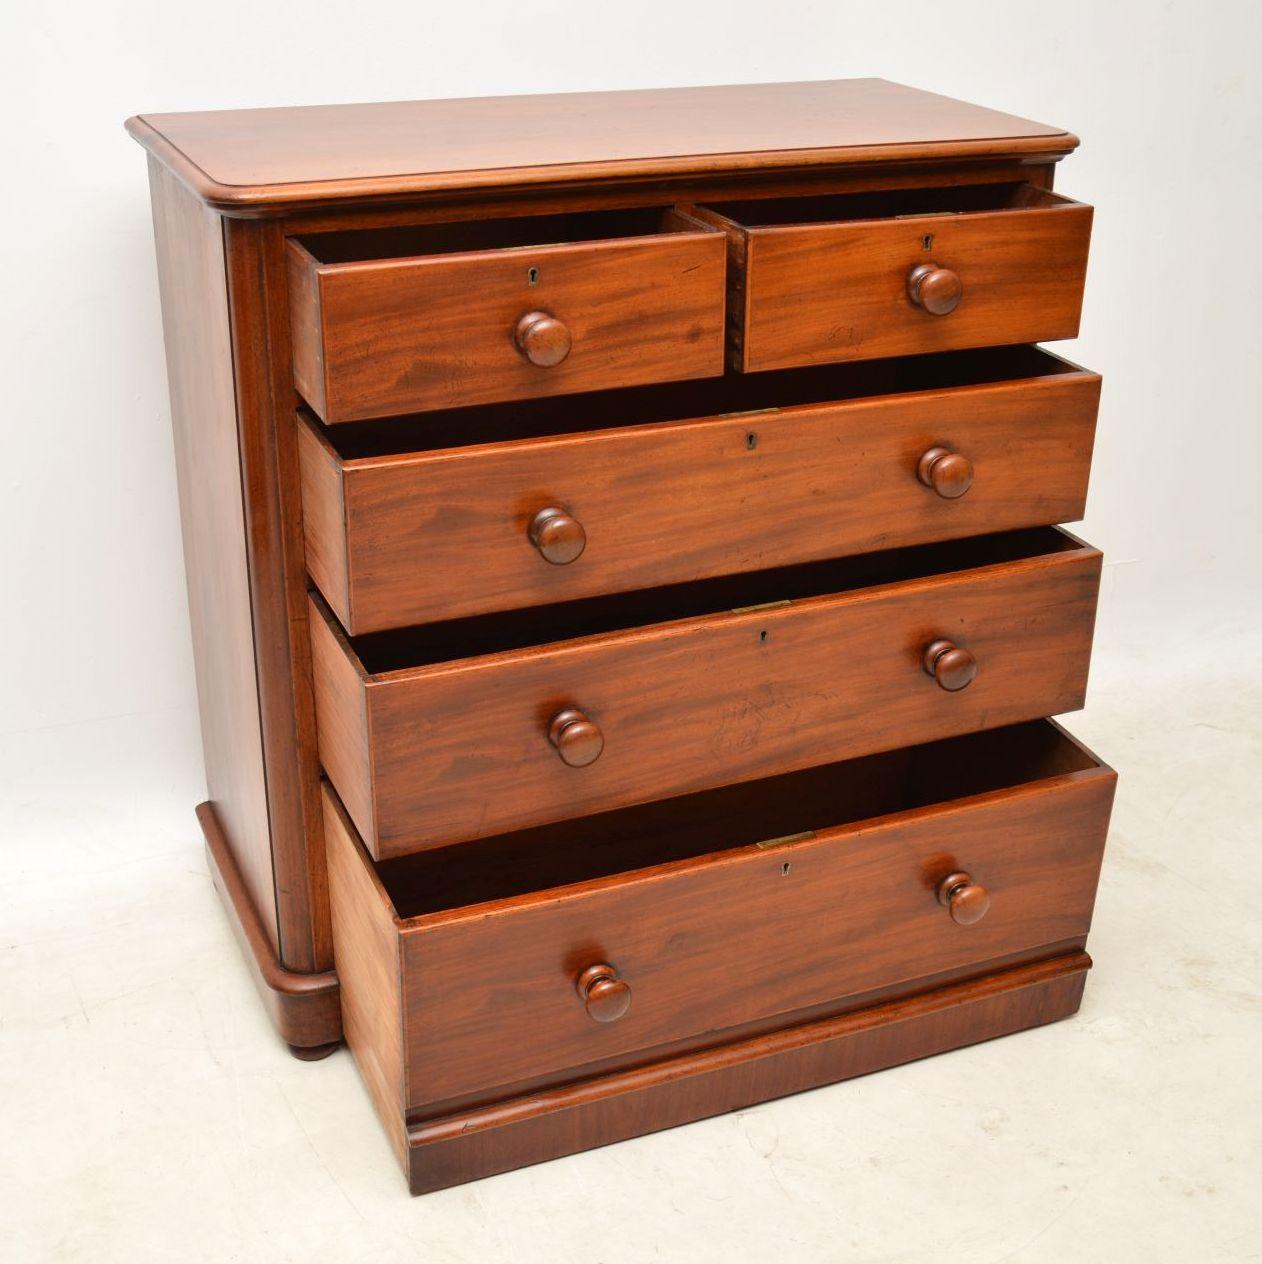 High quality antique Victorian mahogany chest of drawers, with a solid mahogany top, round corners, deep graduated drawers, mahogany bun handles and locks in all the drawers. It has a great original color and is free from any warps or splits in the